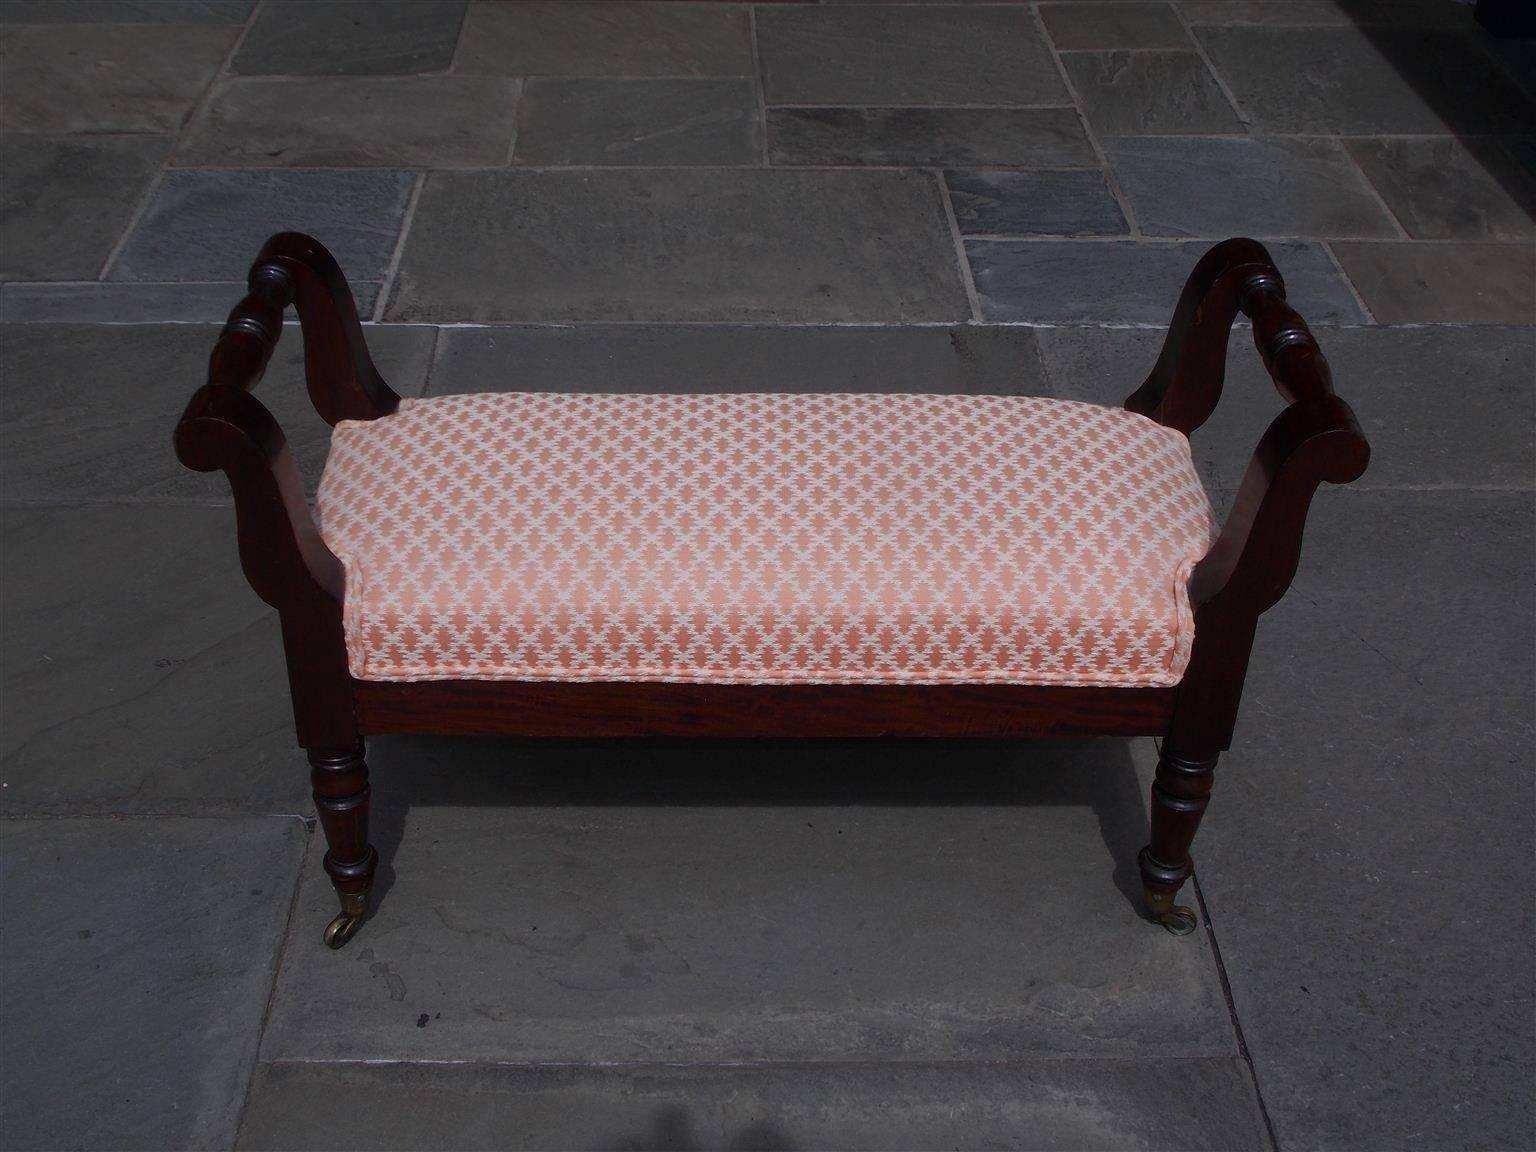 Early 19th Century American Sheraton Mahogany Upholstered Window Bench on Brass Casters, Circa 1820